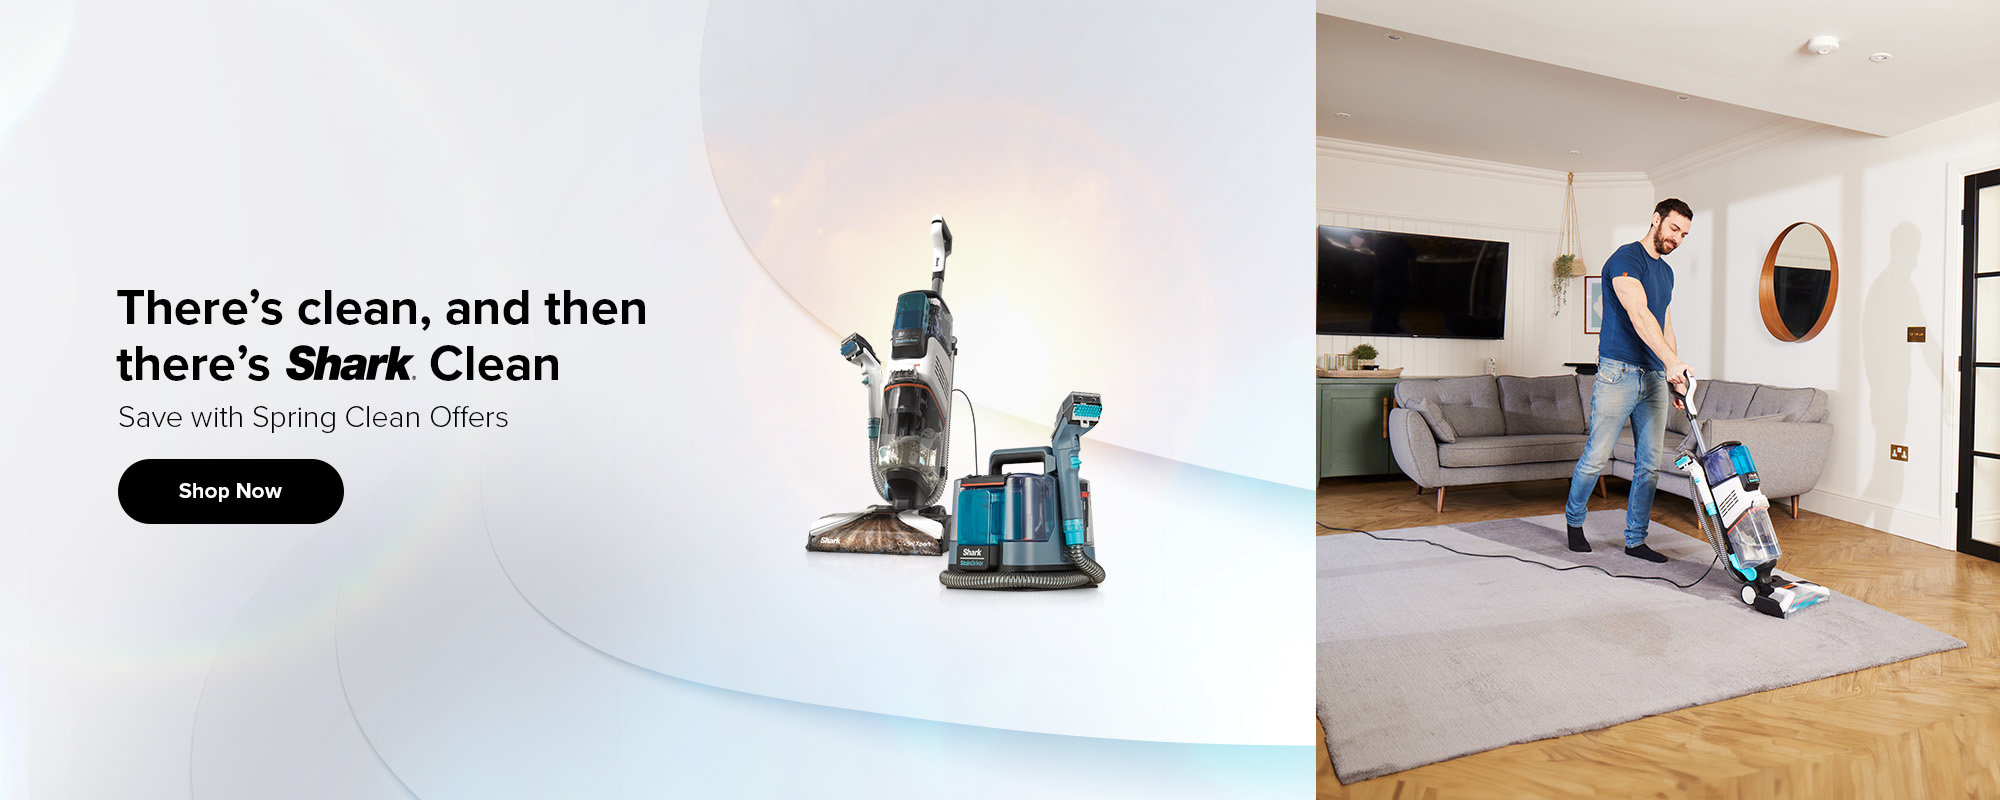 Save up to £130 with the latest offers on Shark Vacuum Cleaners